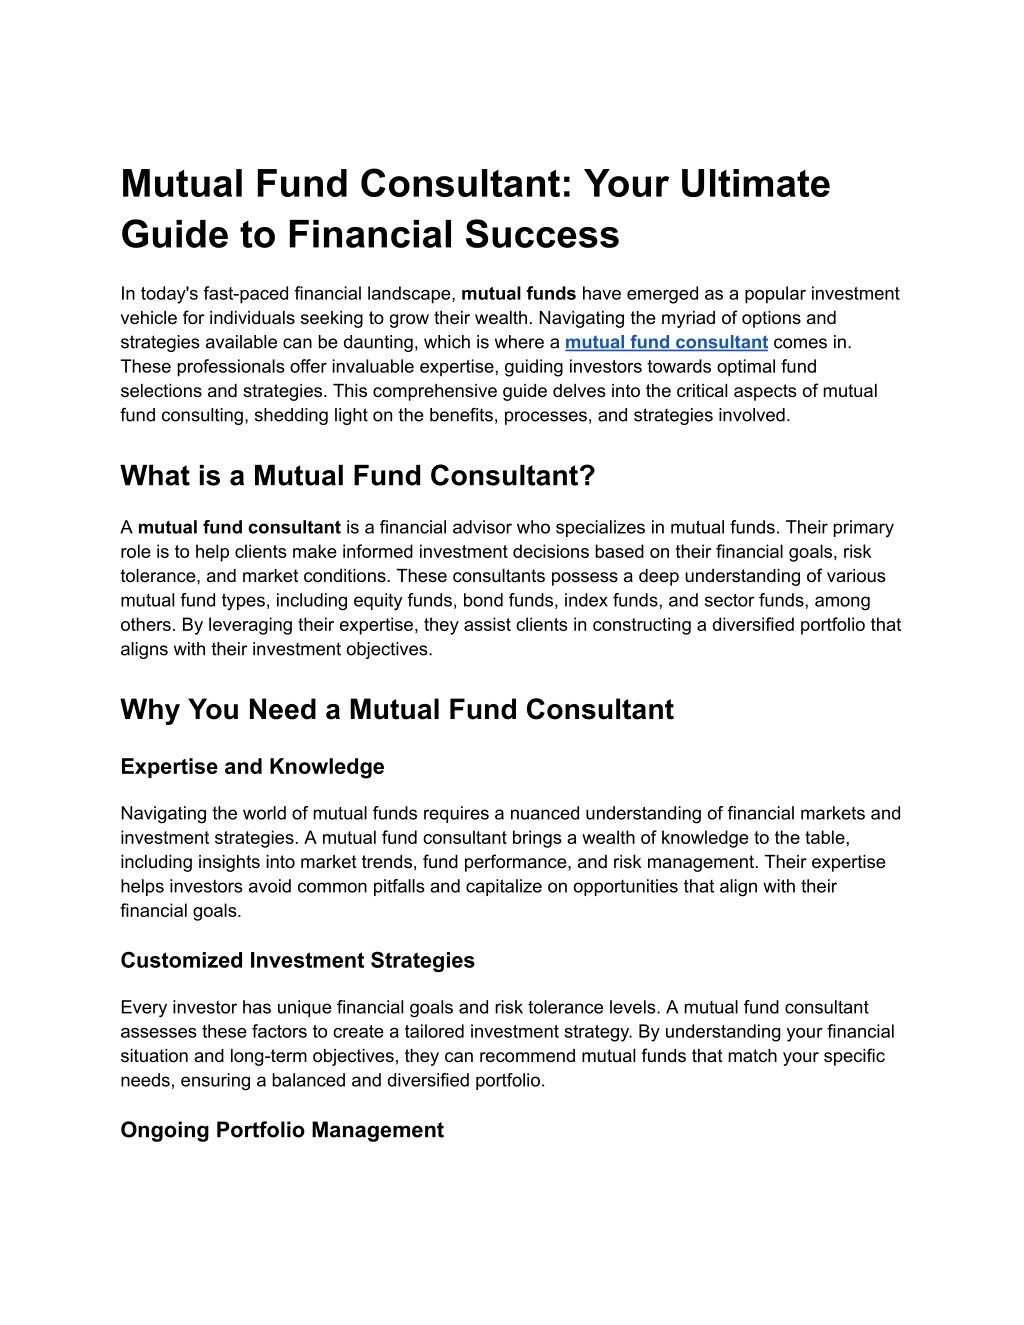 mutual fund consultant your ultimate guide l.w